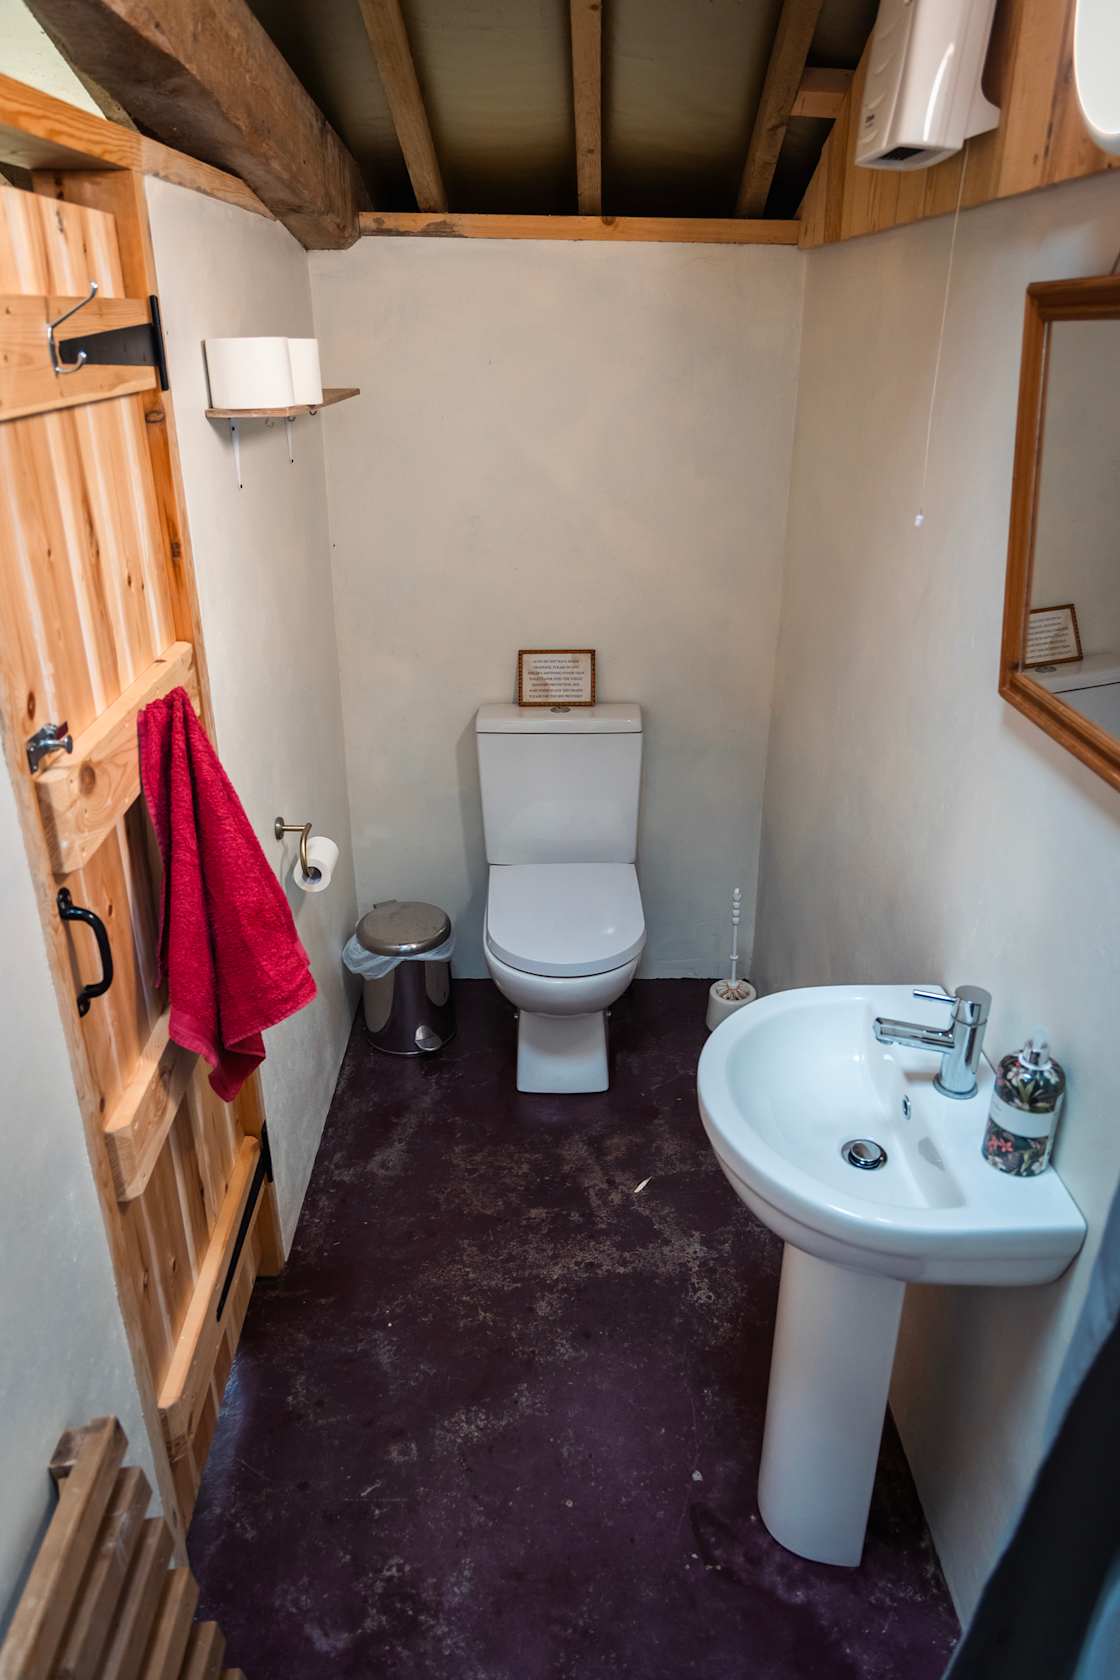 The clean toilet facilities mean it sometimes doesn't even feel like camping.